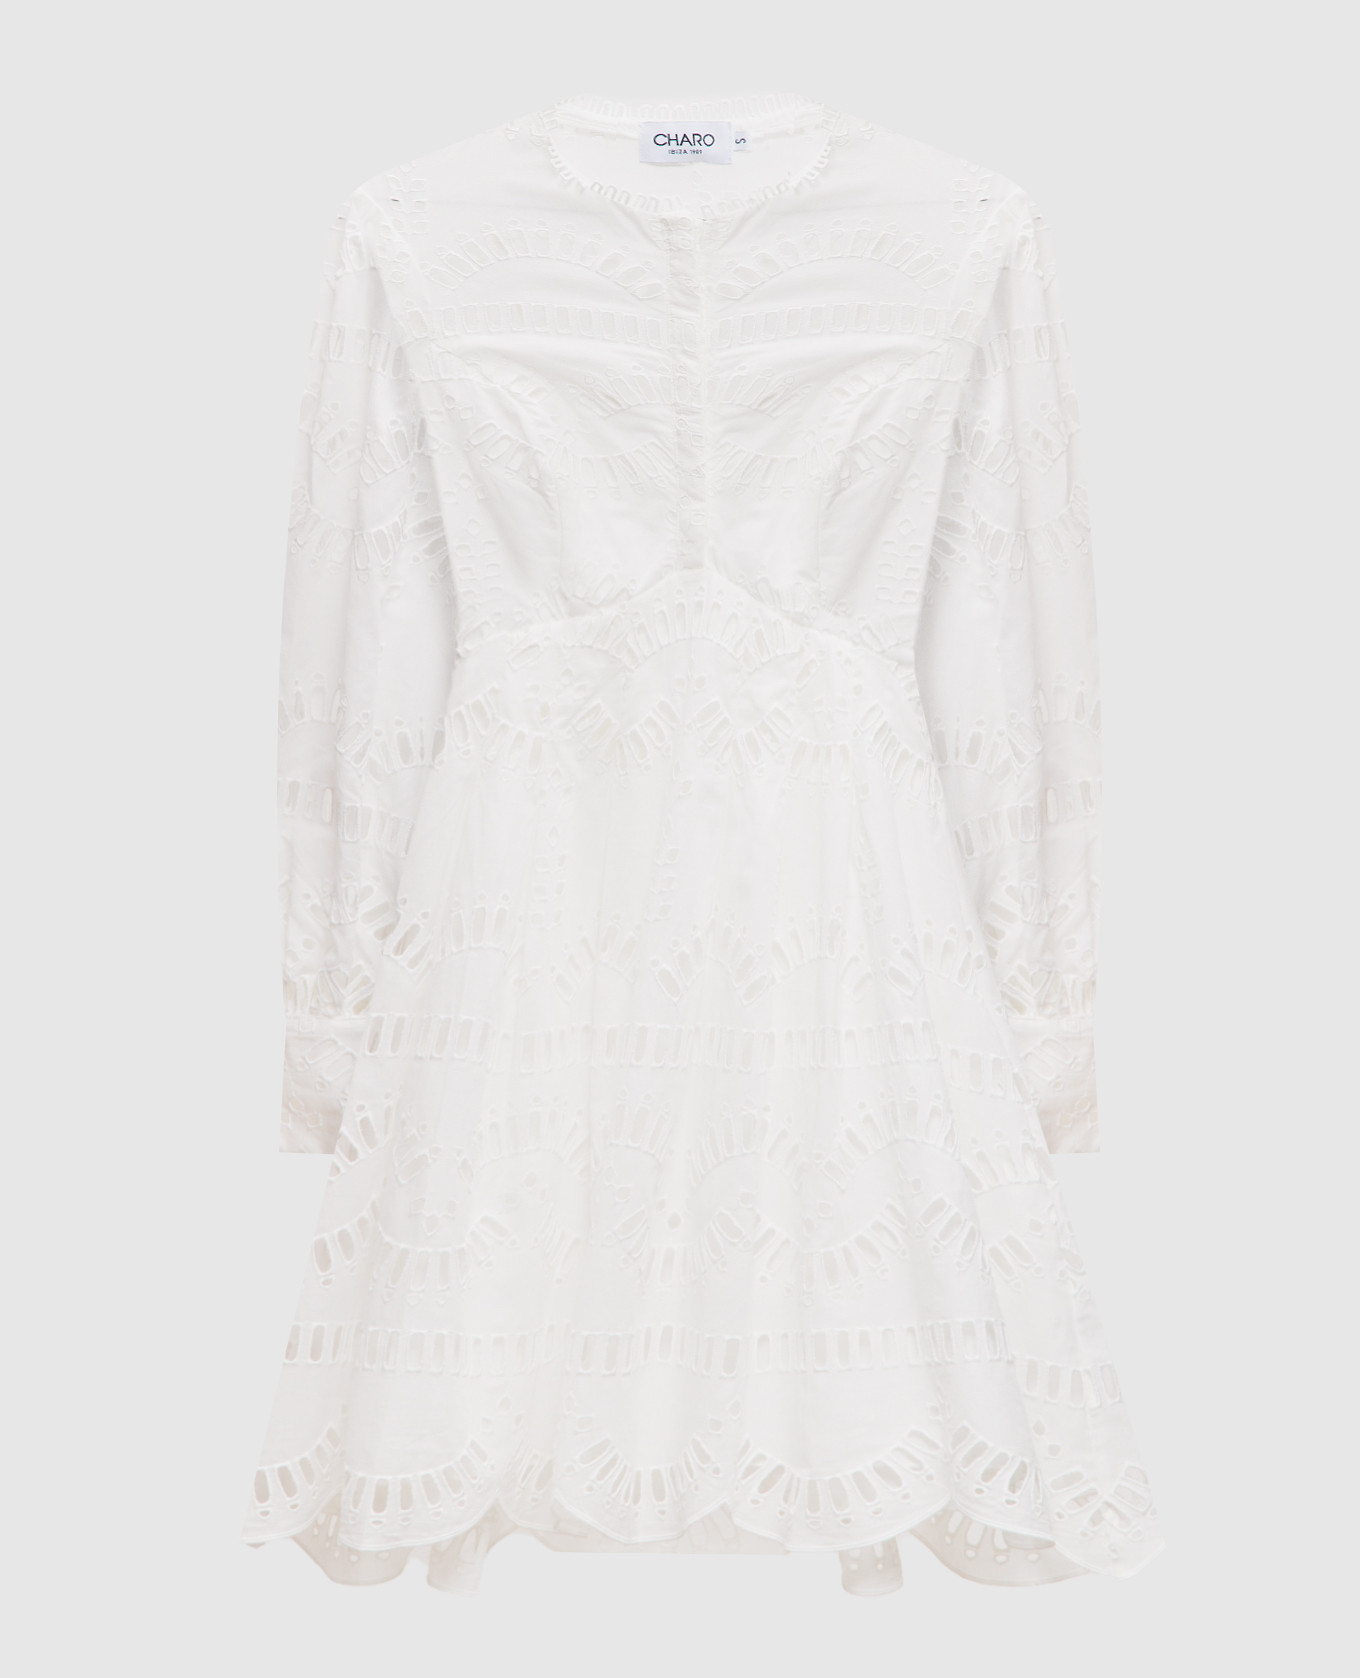 Franca white shirt dress with broderie embroidery